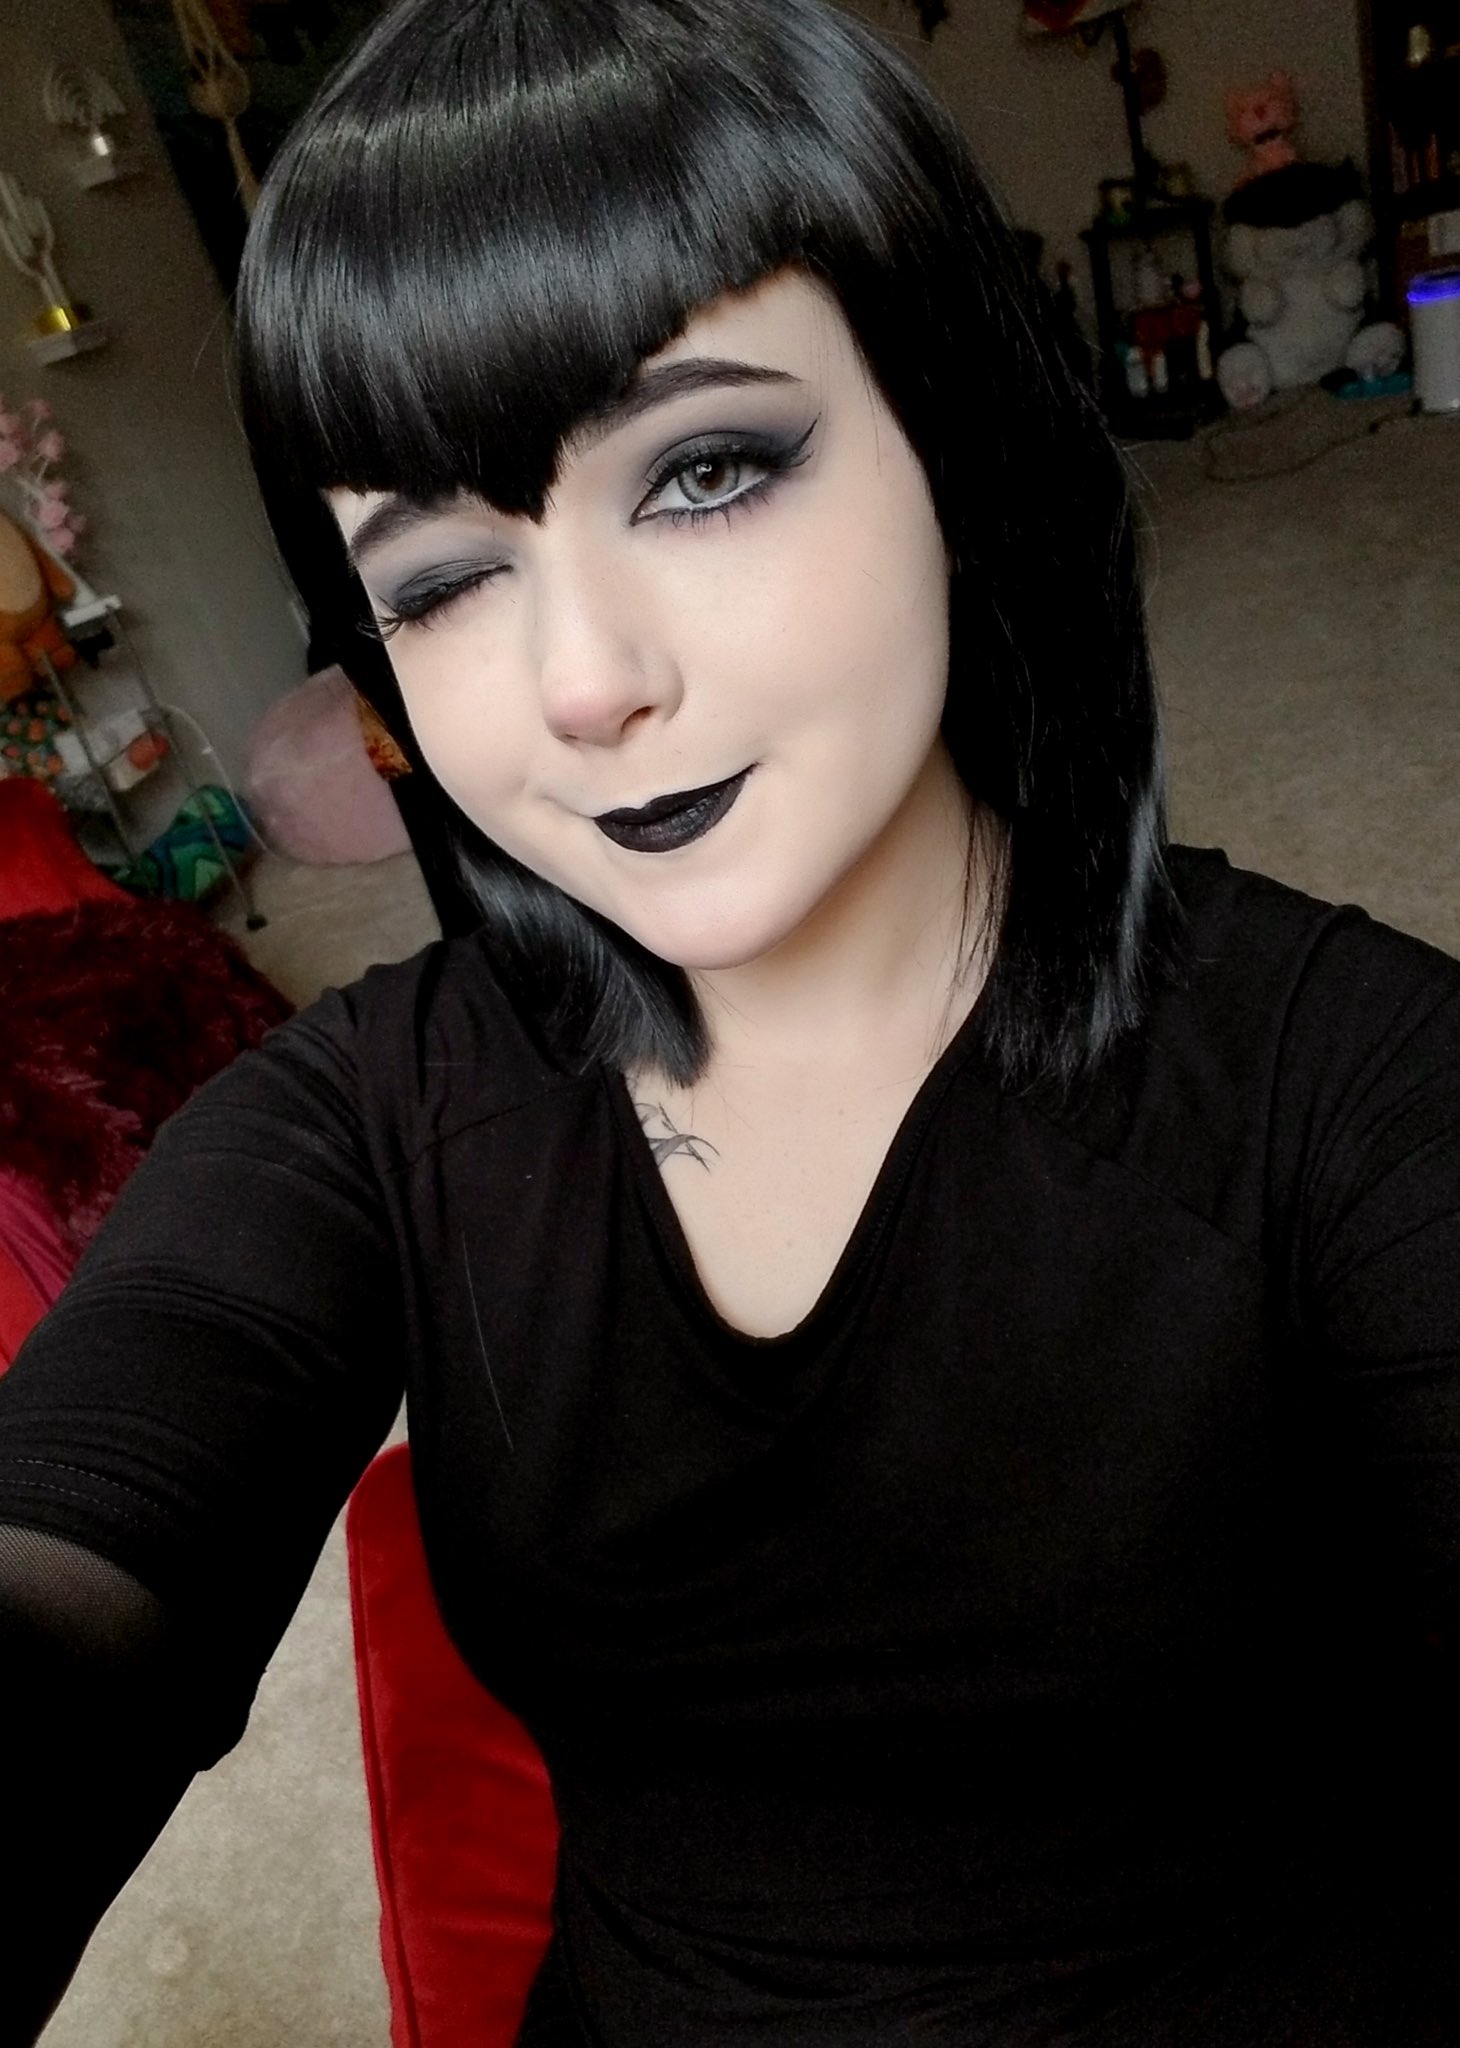 𝕵𝖆𝖈𝐤𝖎𝖊༻ on X: Mavis is so cute!! Goth girls are the way to